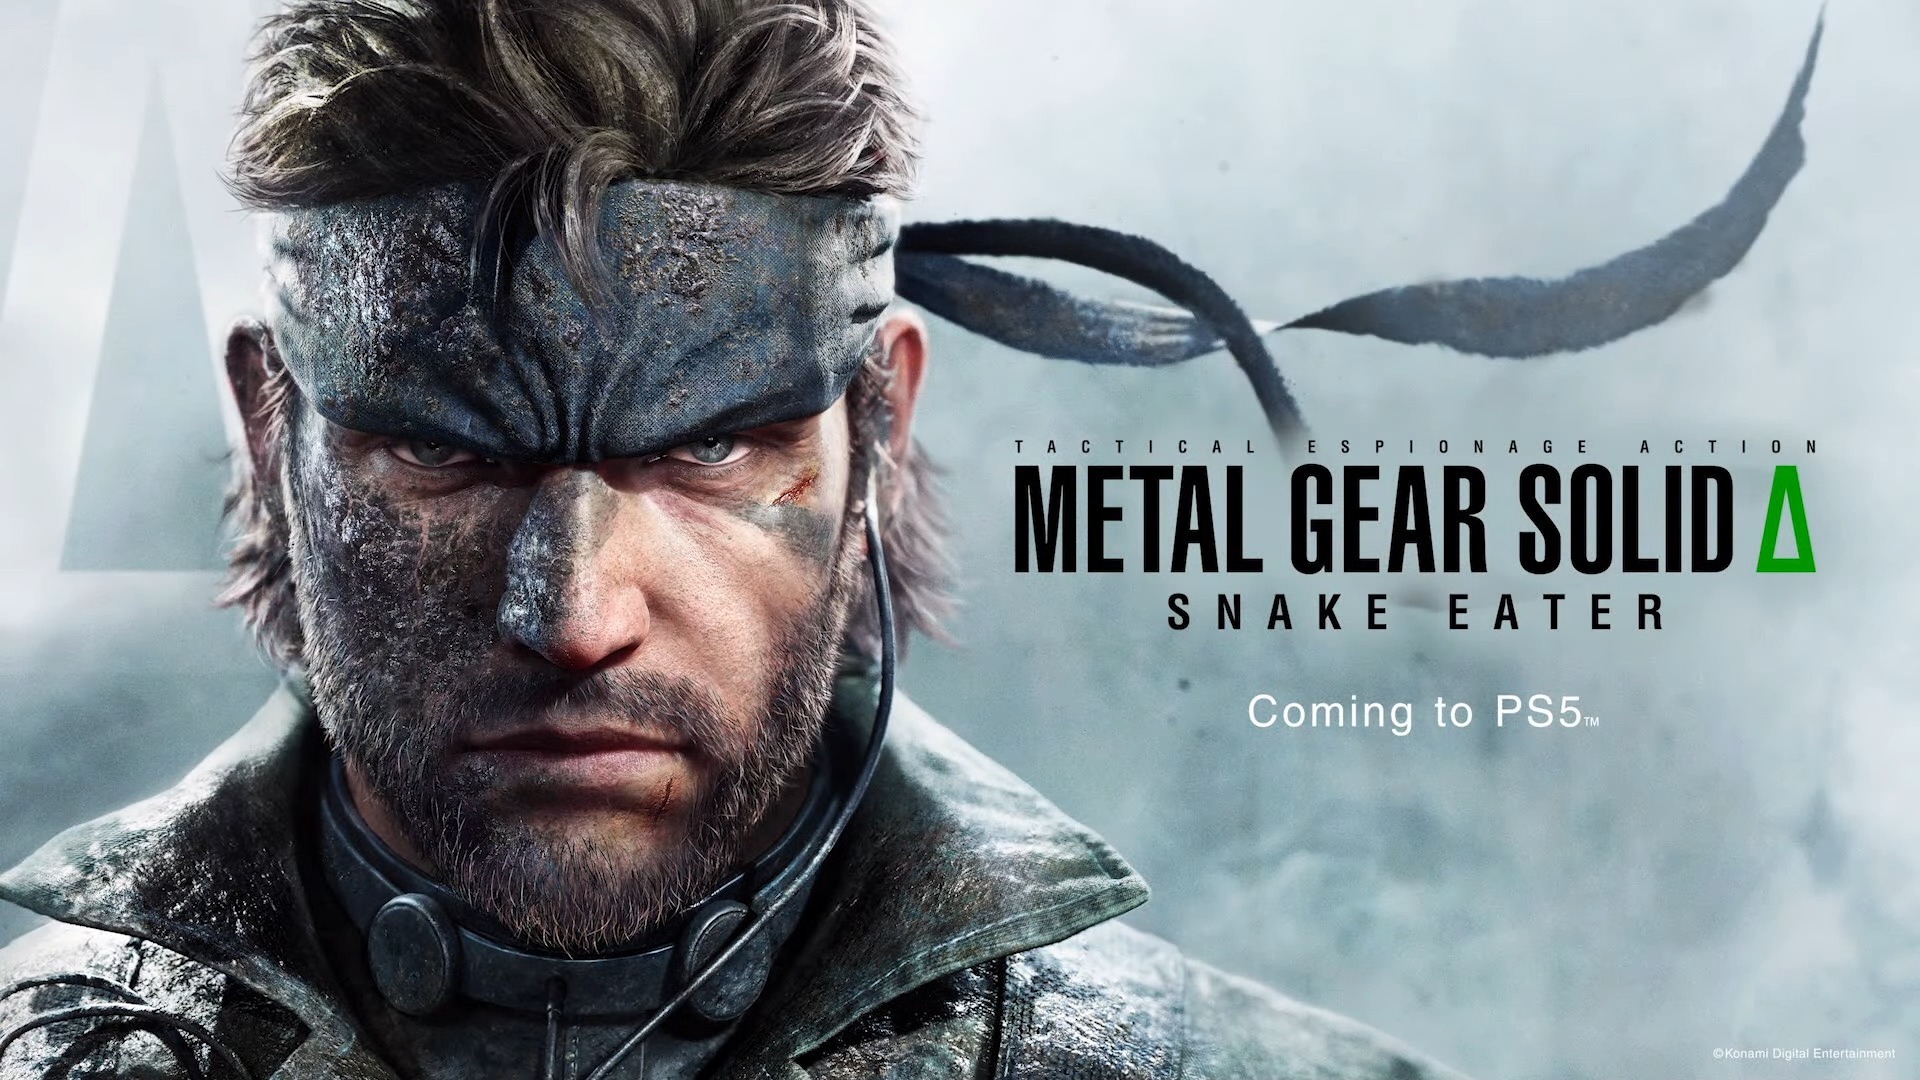 MGS3』をリメイクした新作『METAL GEAR SOLID Δ』と『METAL GEAR SOLID